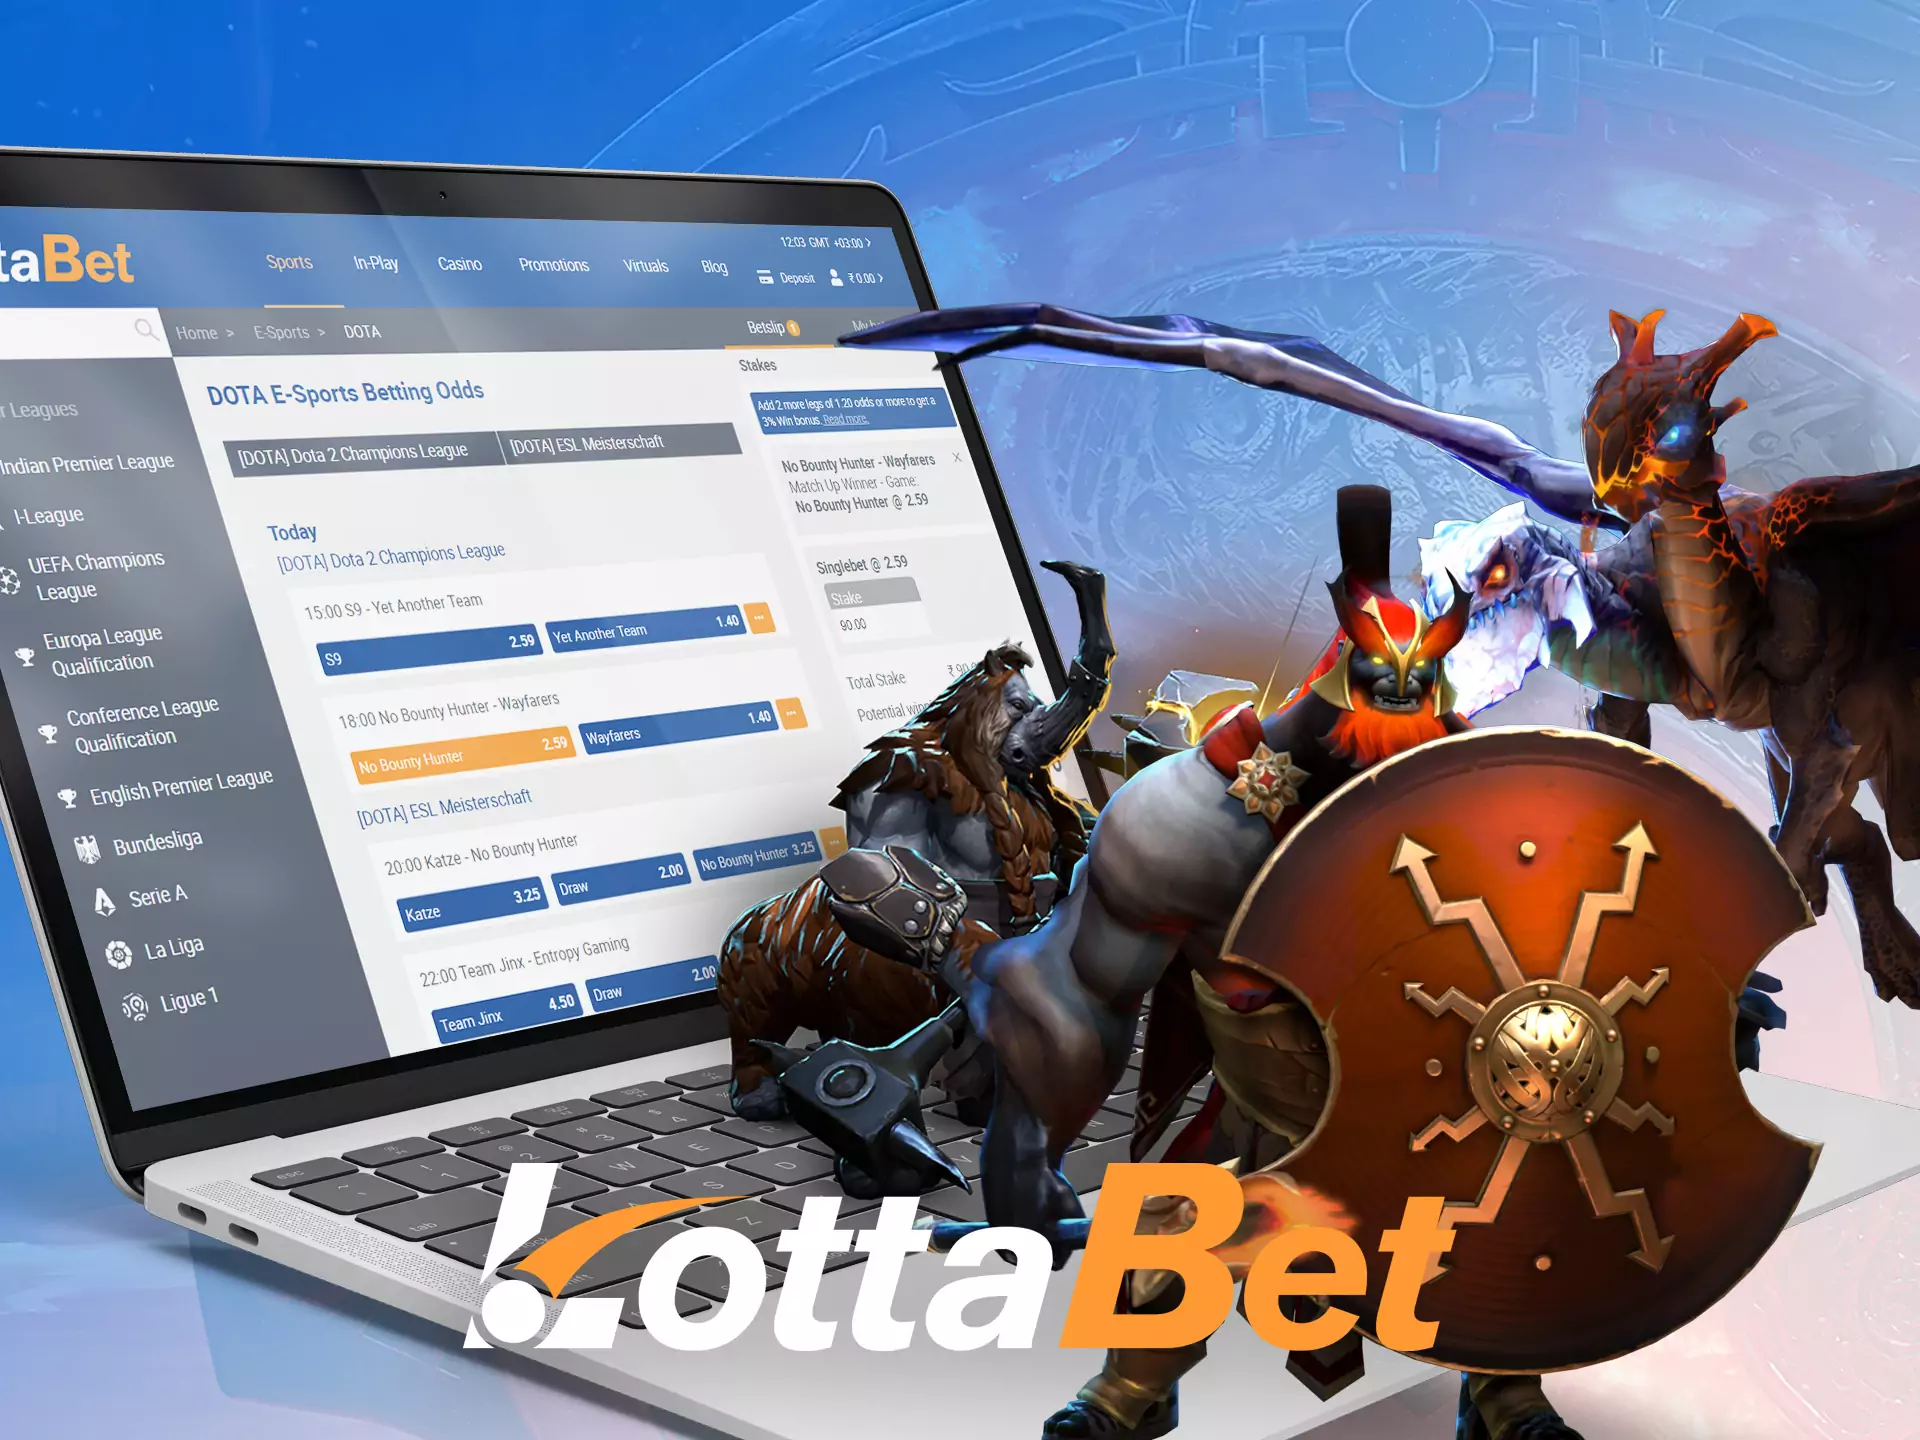 The Dota 2 tournaments are frequent in the Lottabet sportsbook.